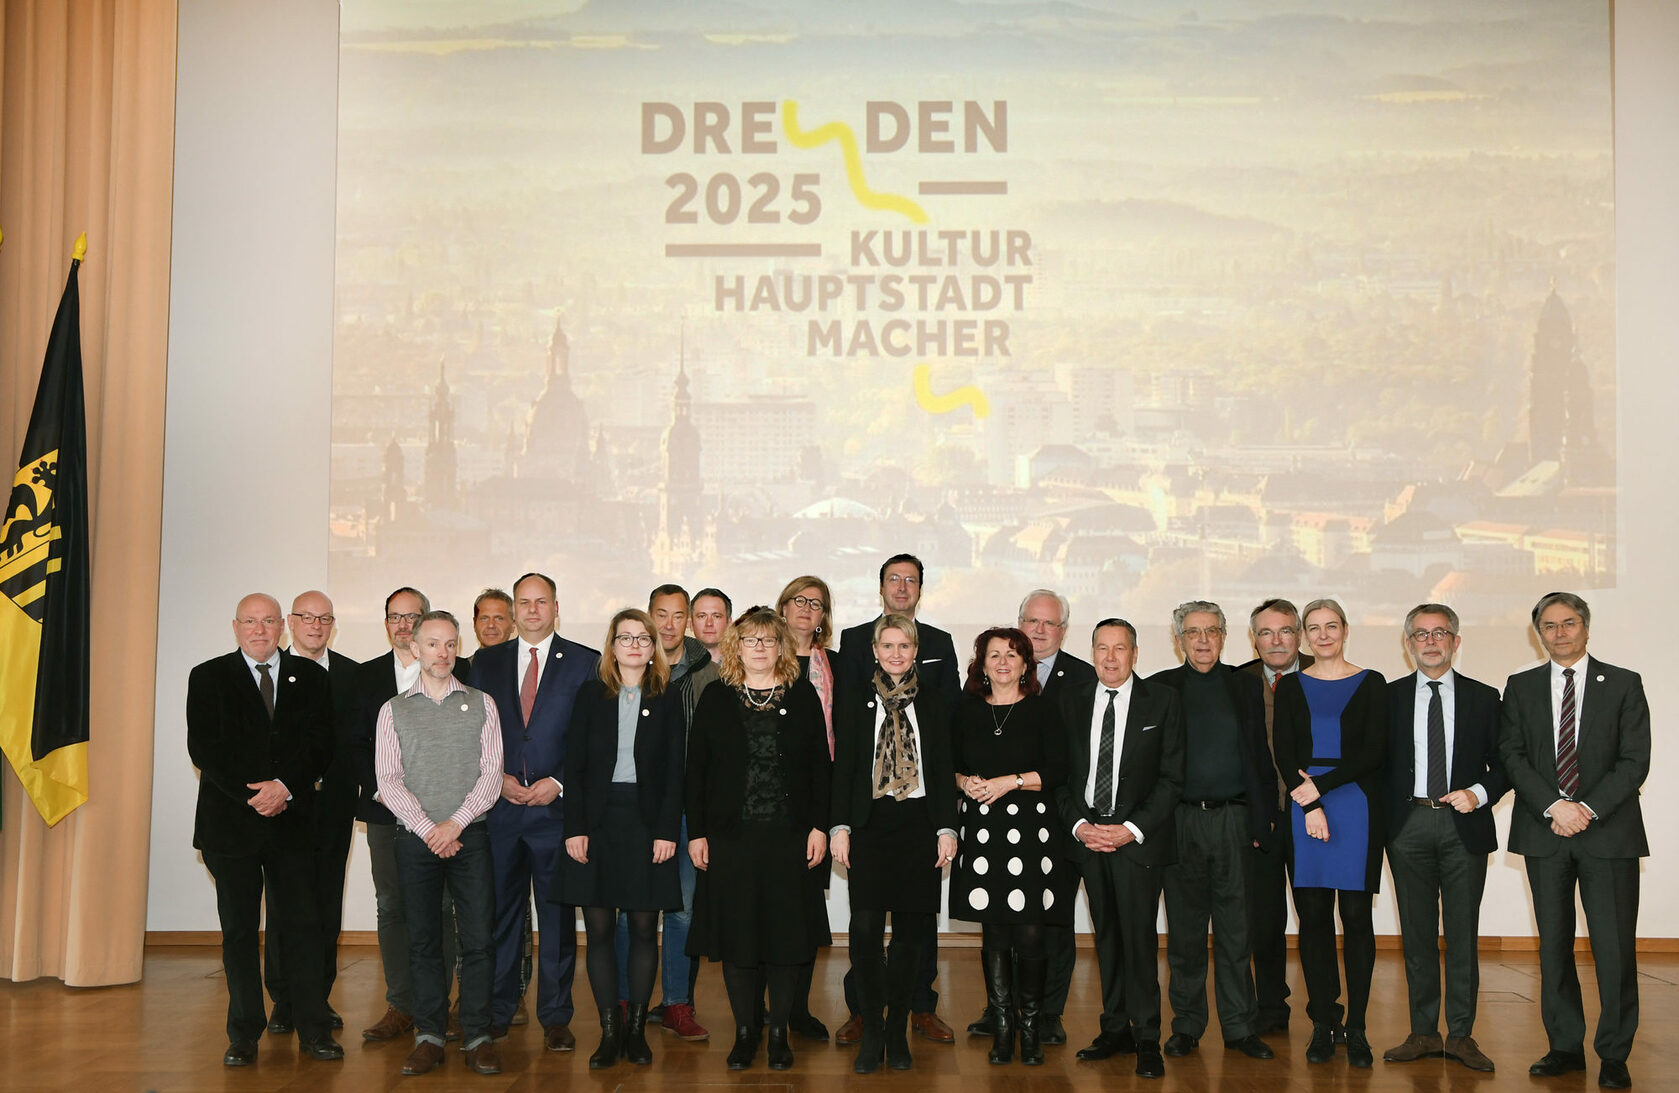 Group photo of the Board of Trustees of the Dresden "European Capital of Culture" bid